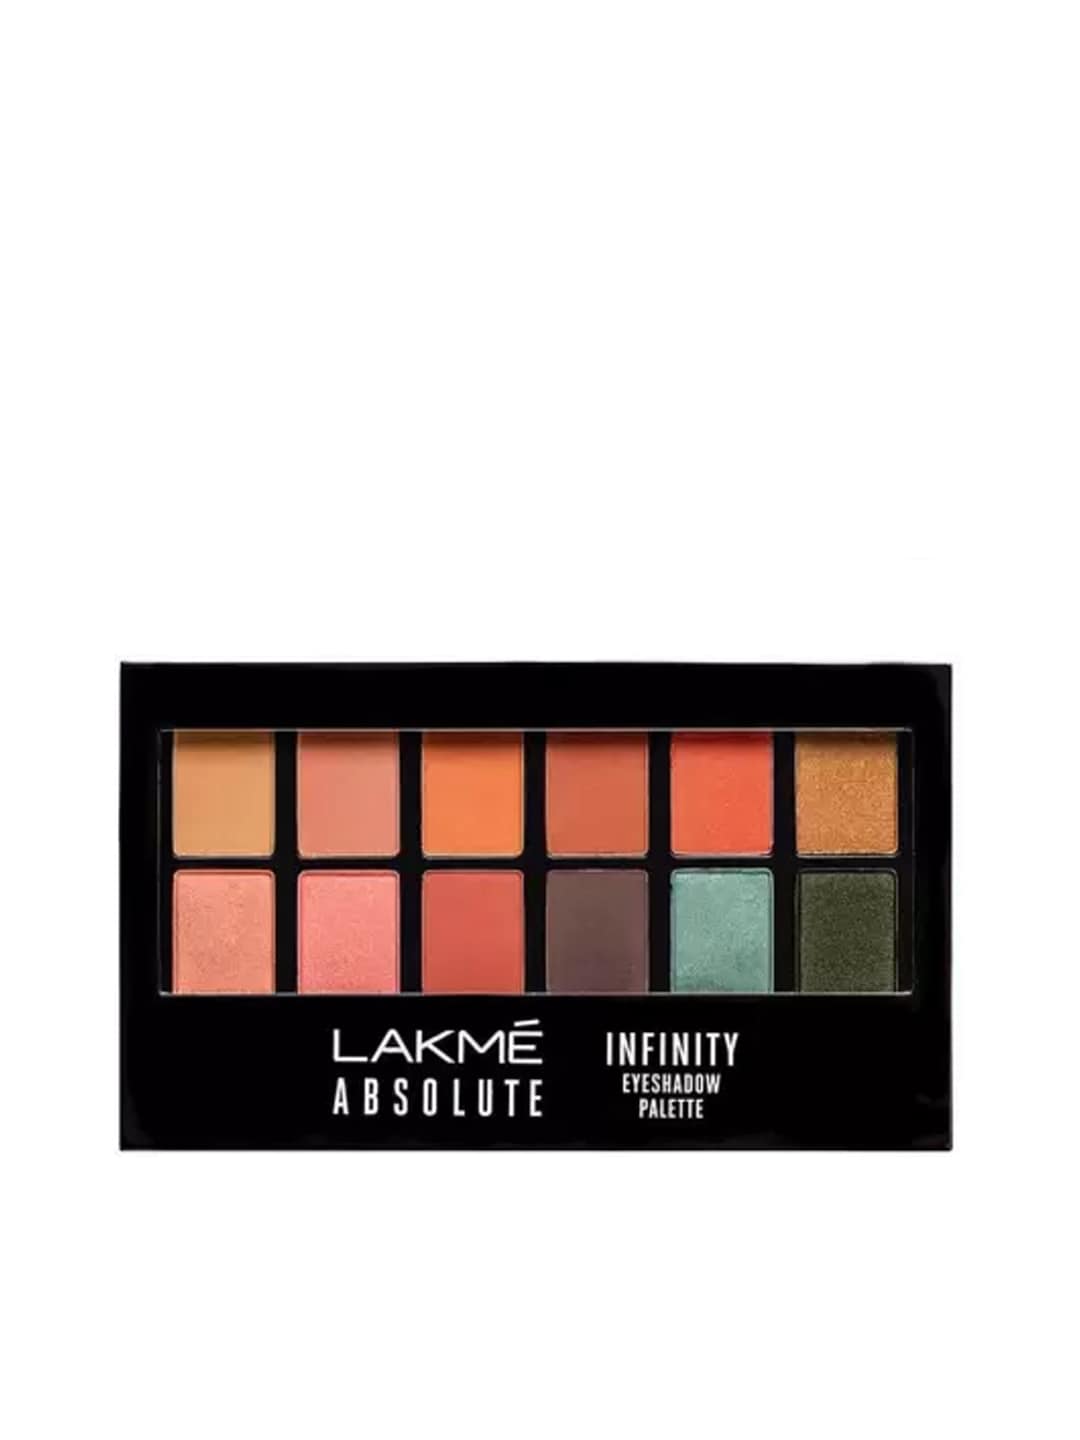 Lakme Absolute Infinity Eye Shadow Palette - Coral Sunset 12 g Price in India